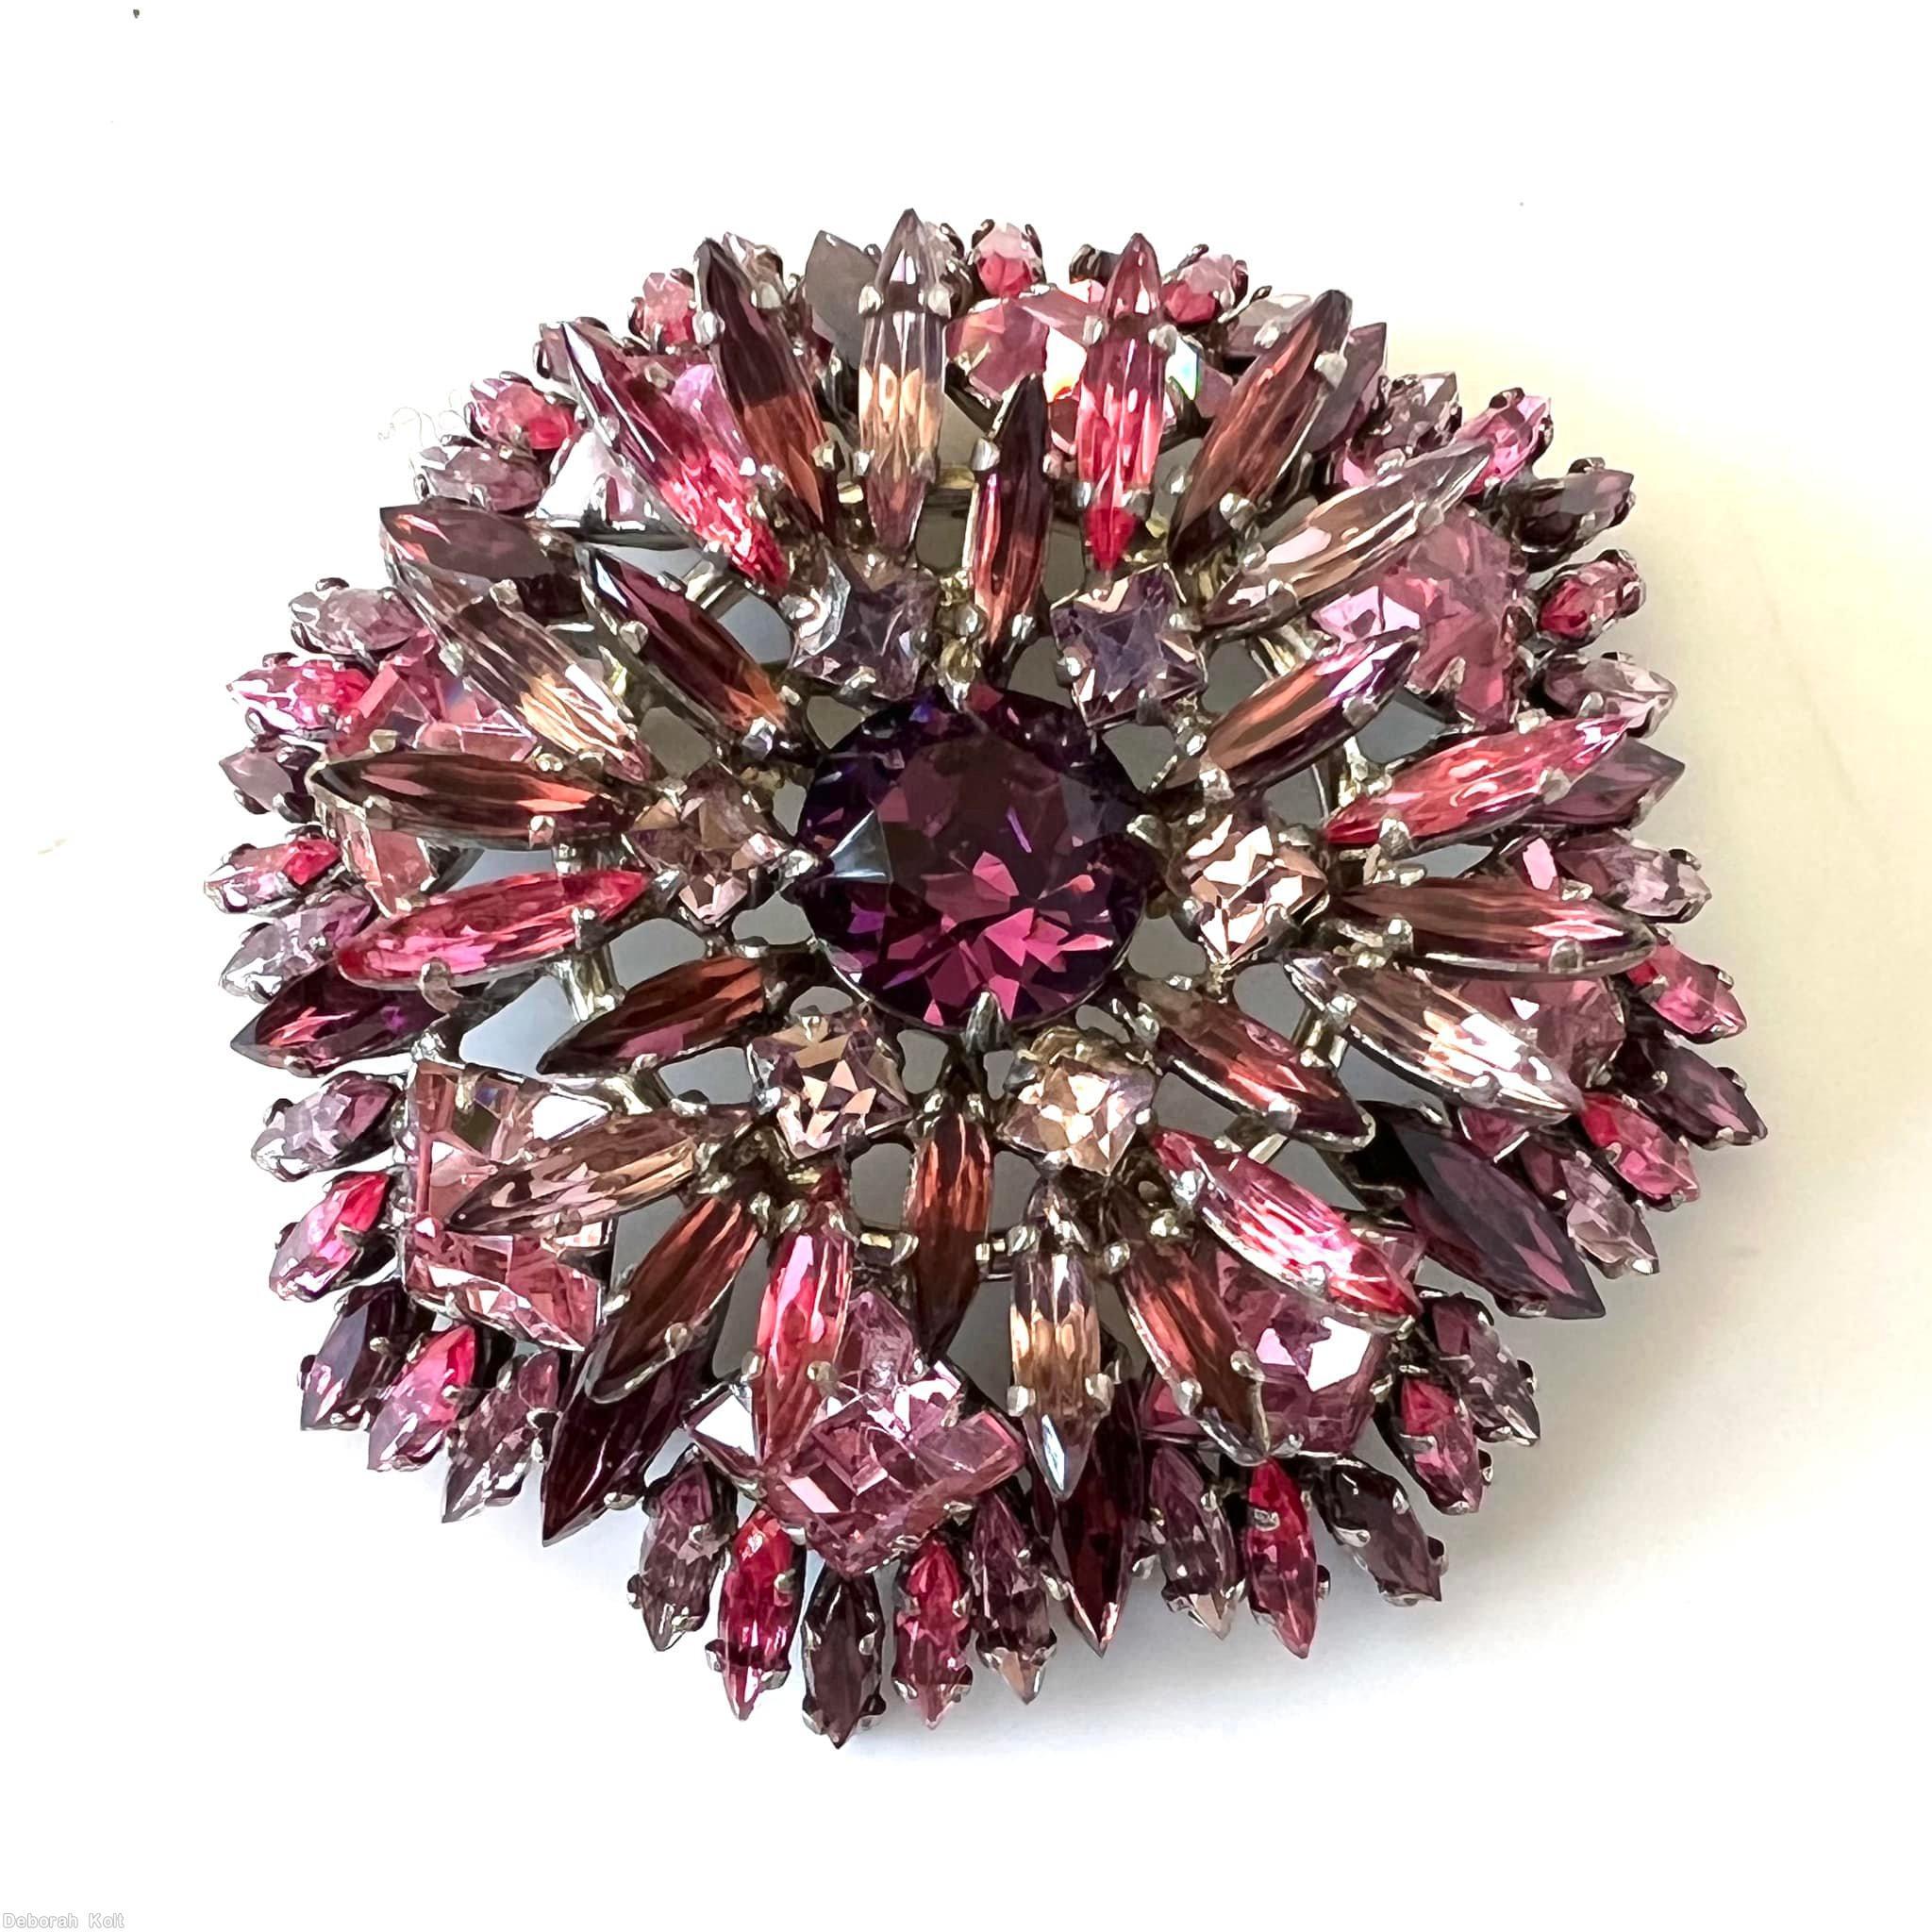 Schreiner round shaped flat top radial navette pin large chaton center 6 small square surrounding stone 6 navette surrounding stone 8 large square stone purple faceted large round stone center peach small square stone pink navette clear ice pink square stone lavender navette silvertone jewelry